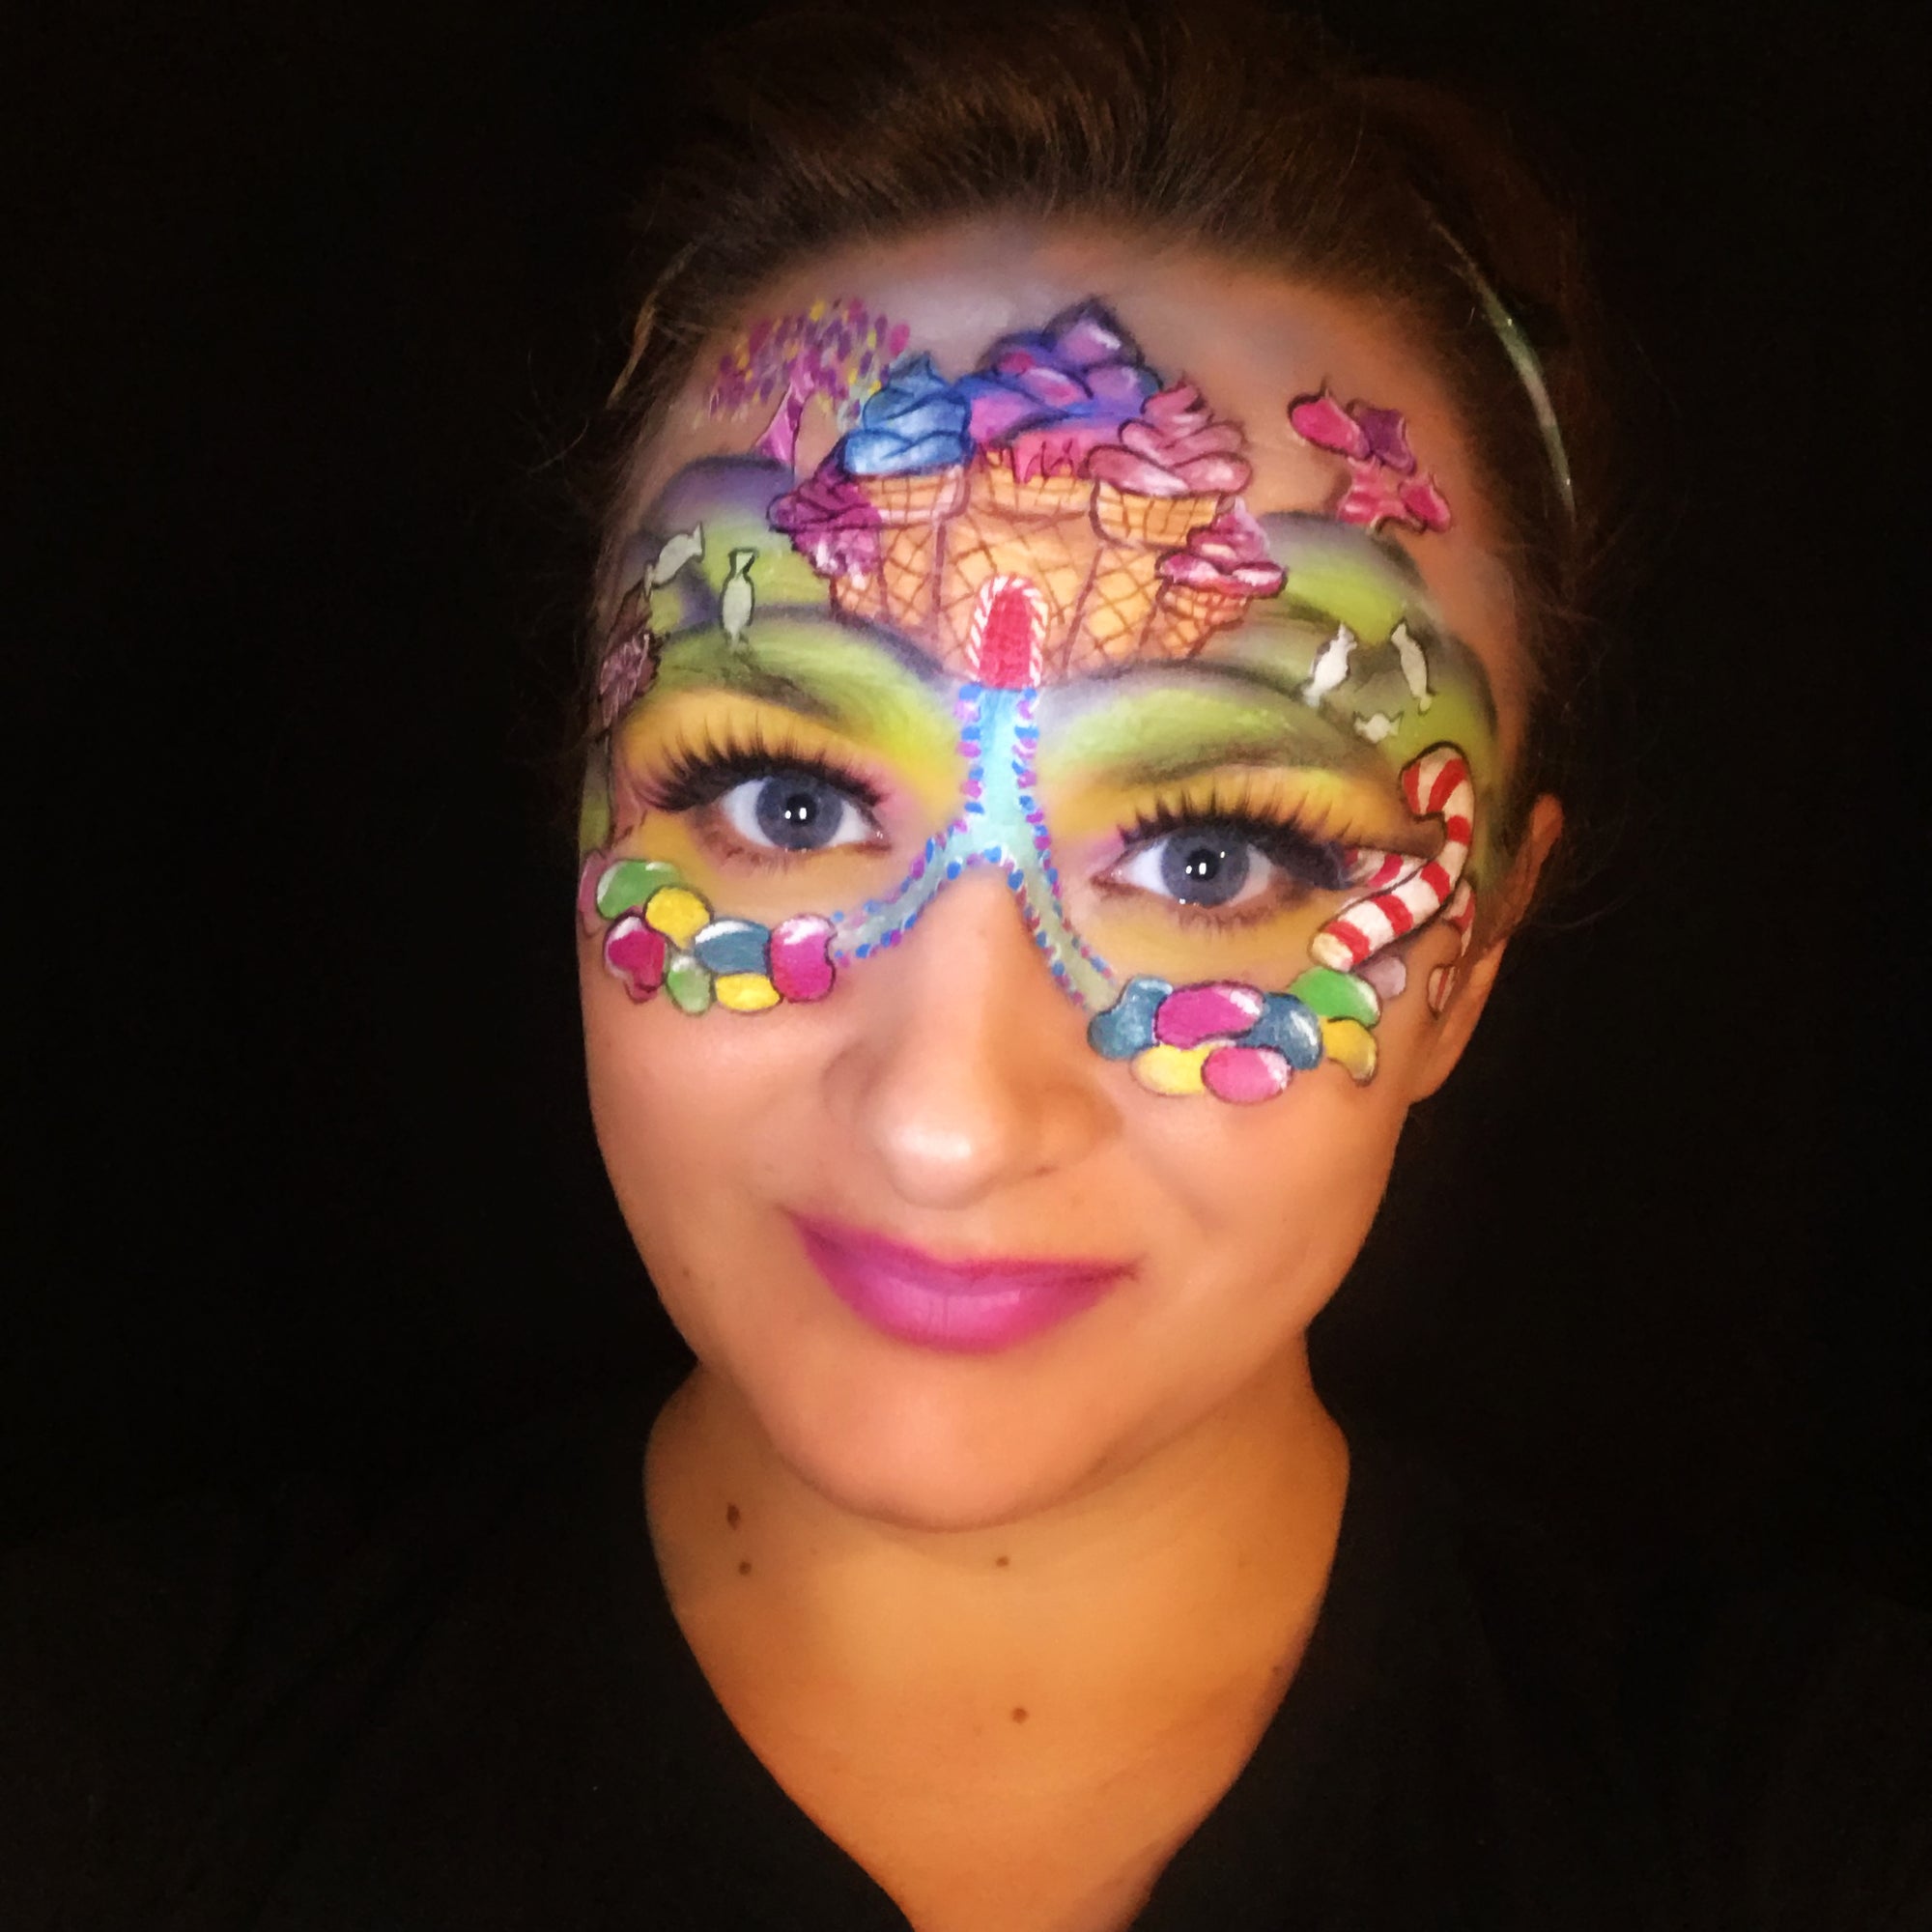 Candy Land Dream Face Paint Design by Marina